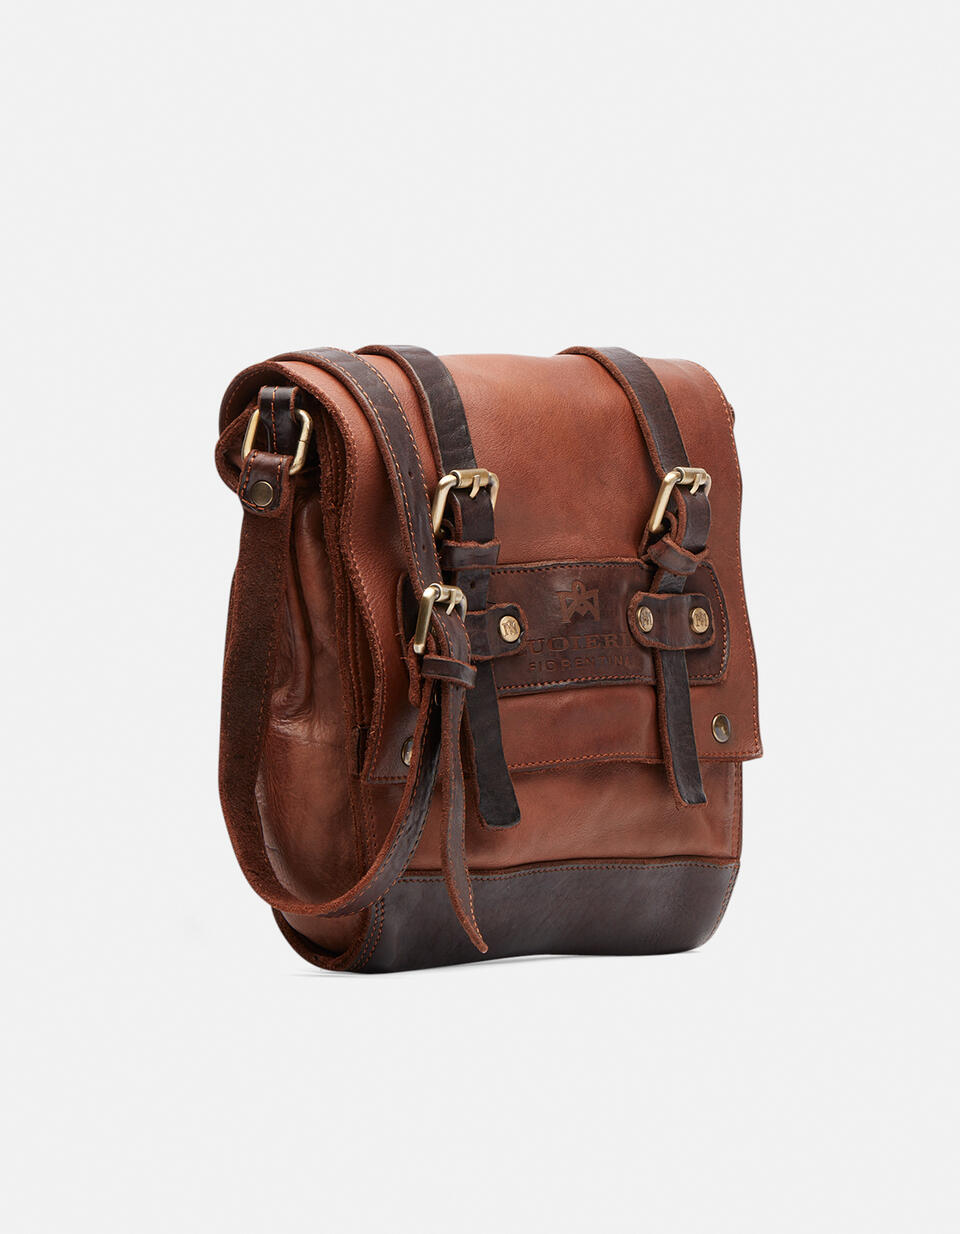 Millennial bag in natural leather - Crossbody Bags - MEN'S BAGS | bags  - Crossbody Bags - MEN'S BAGS | bagsCuoieria Fiorentina